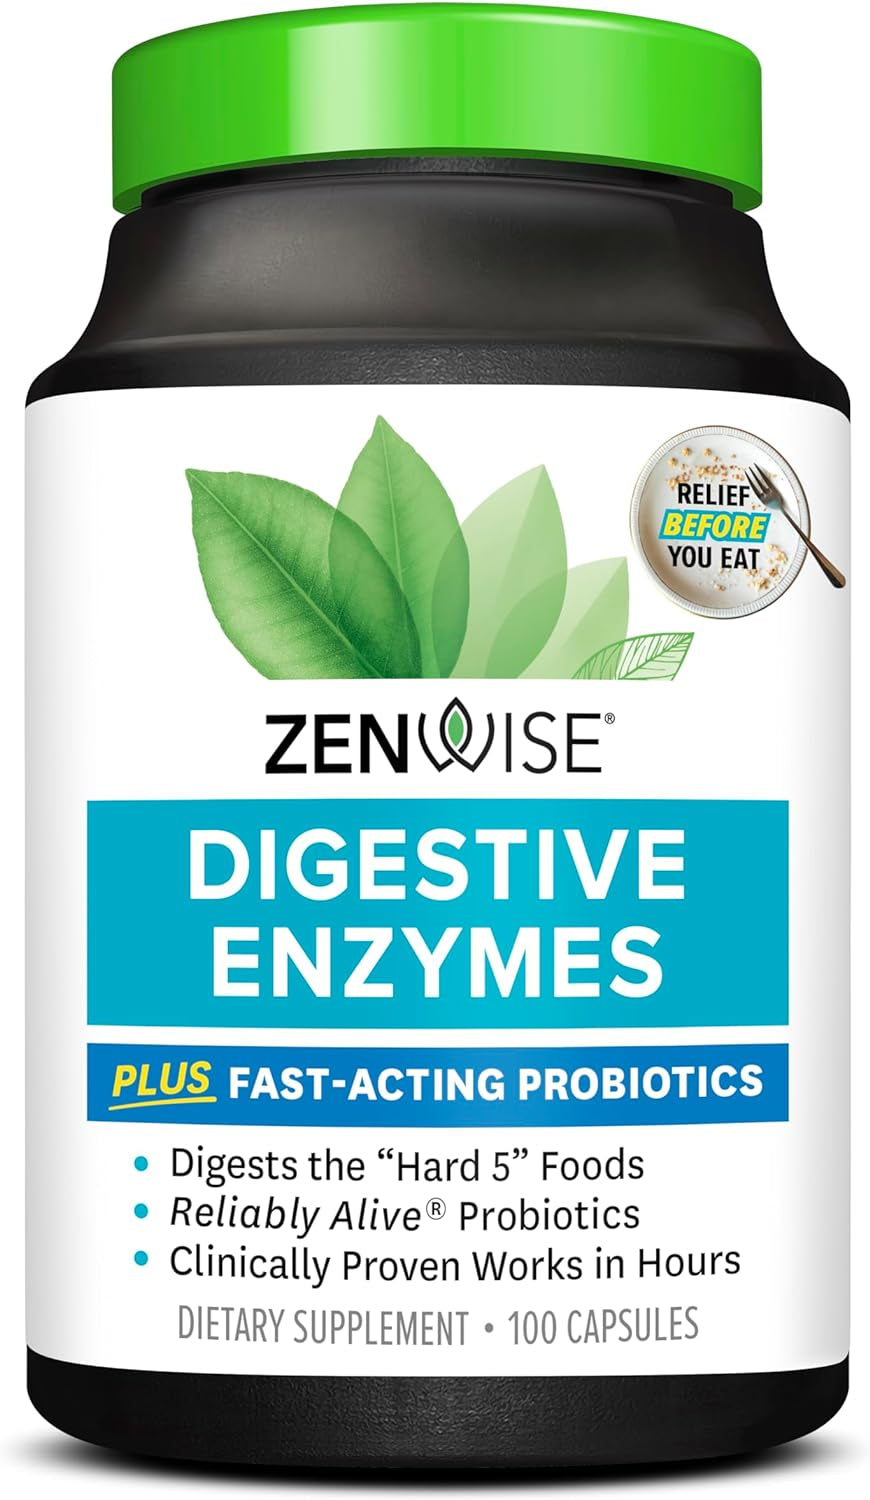 "Digestive Harmony: Probiotic Enzyme Blend for Gut Health - 180 Capsules"